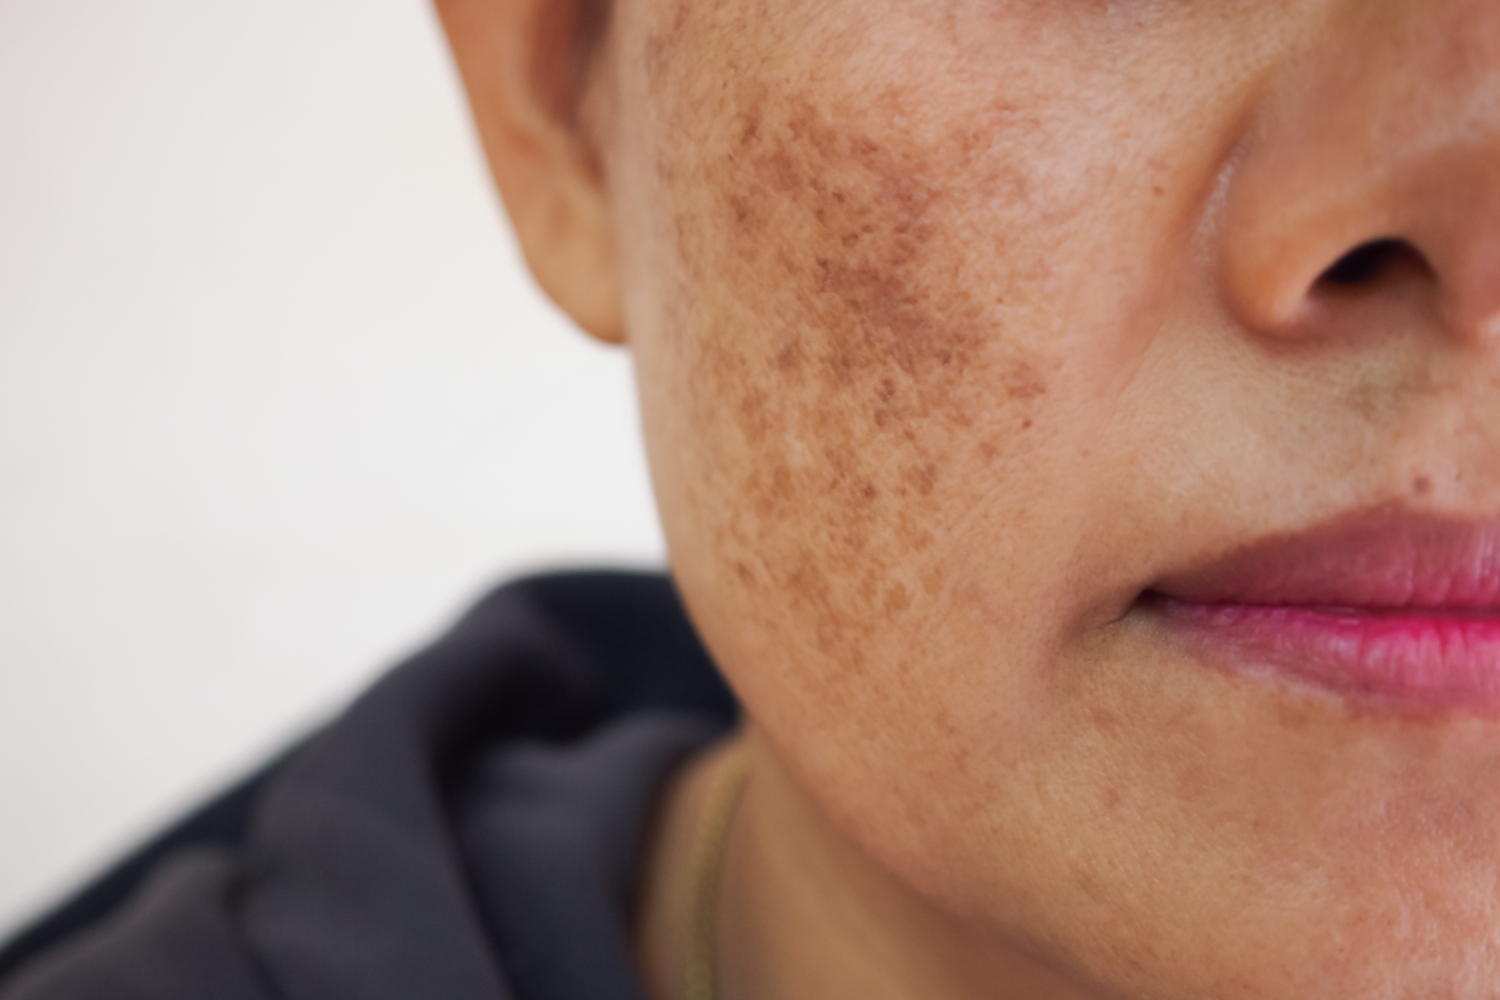 Melasma is a discoloration of the mid-face that looks like darker patches of skin